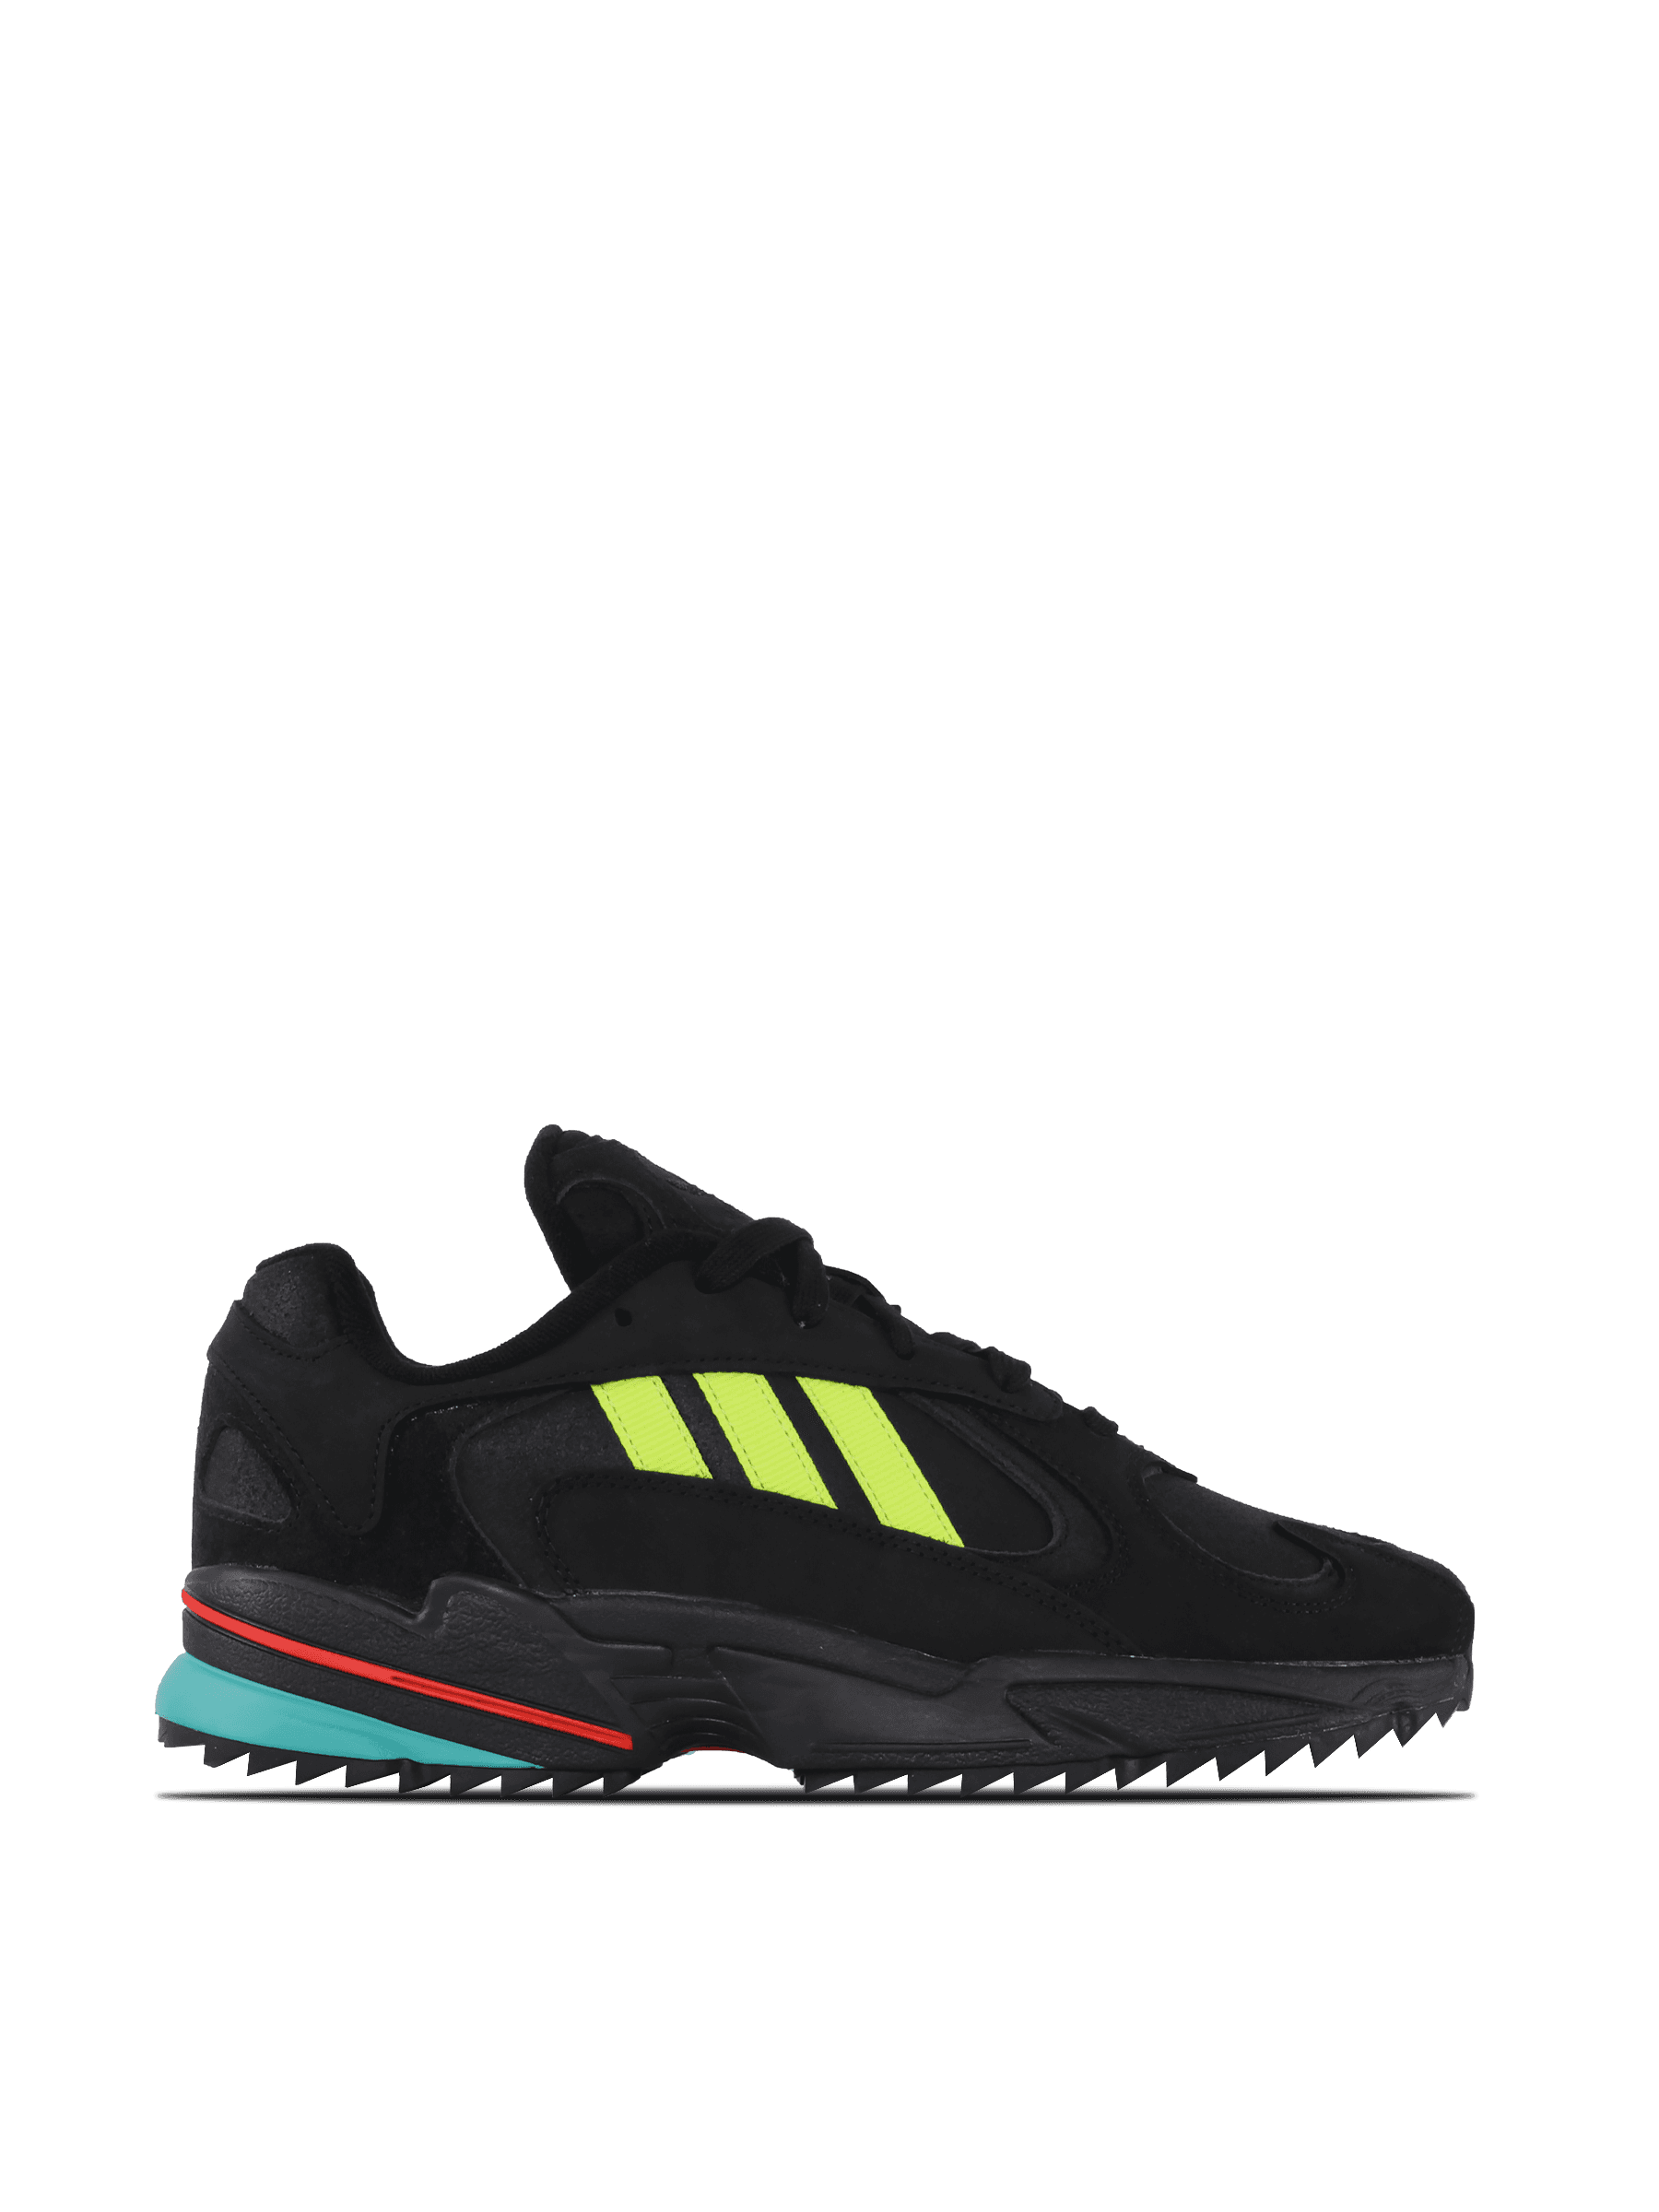 adidas_yung_1_trail_ee5321_a.png